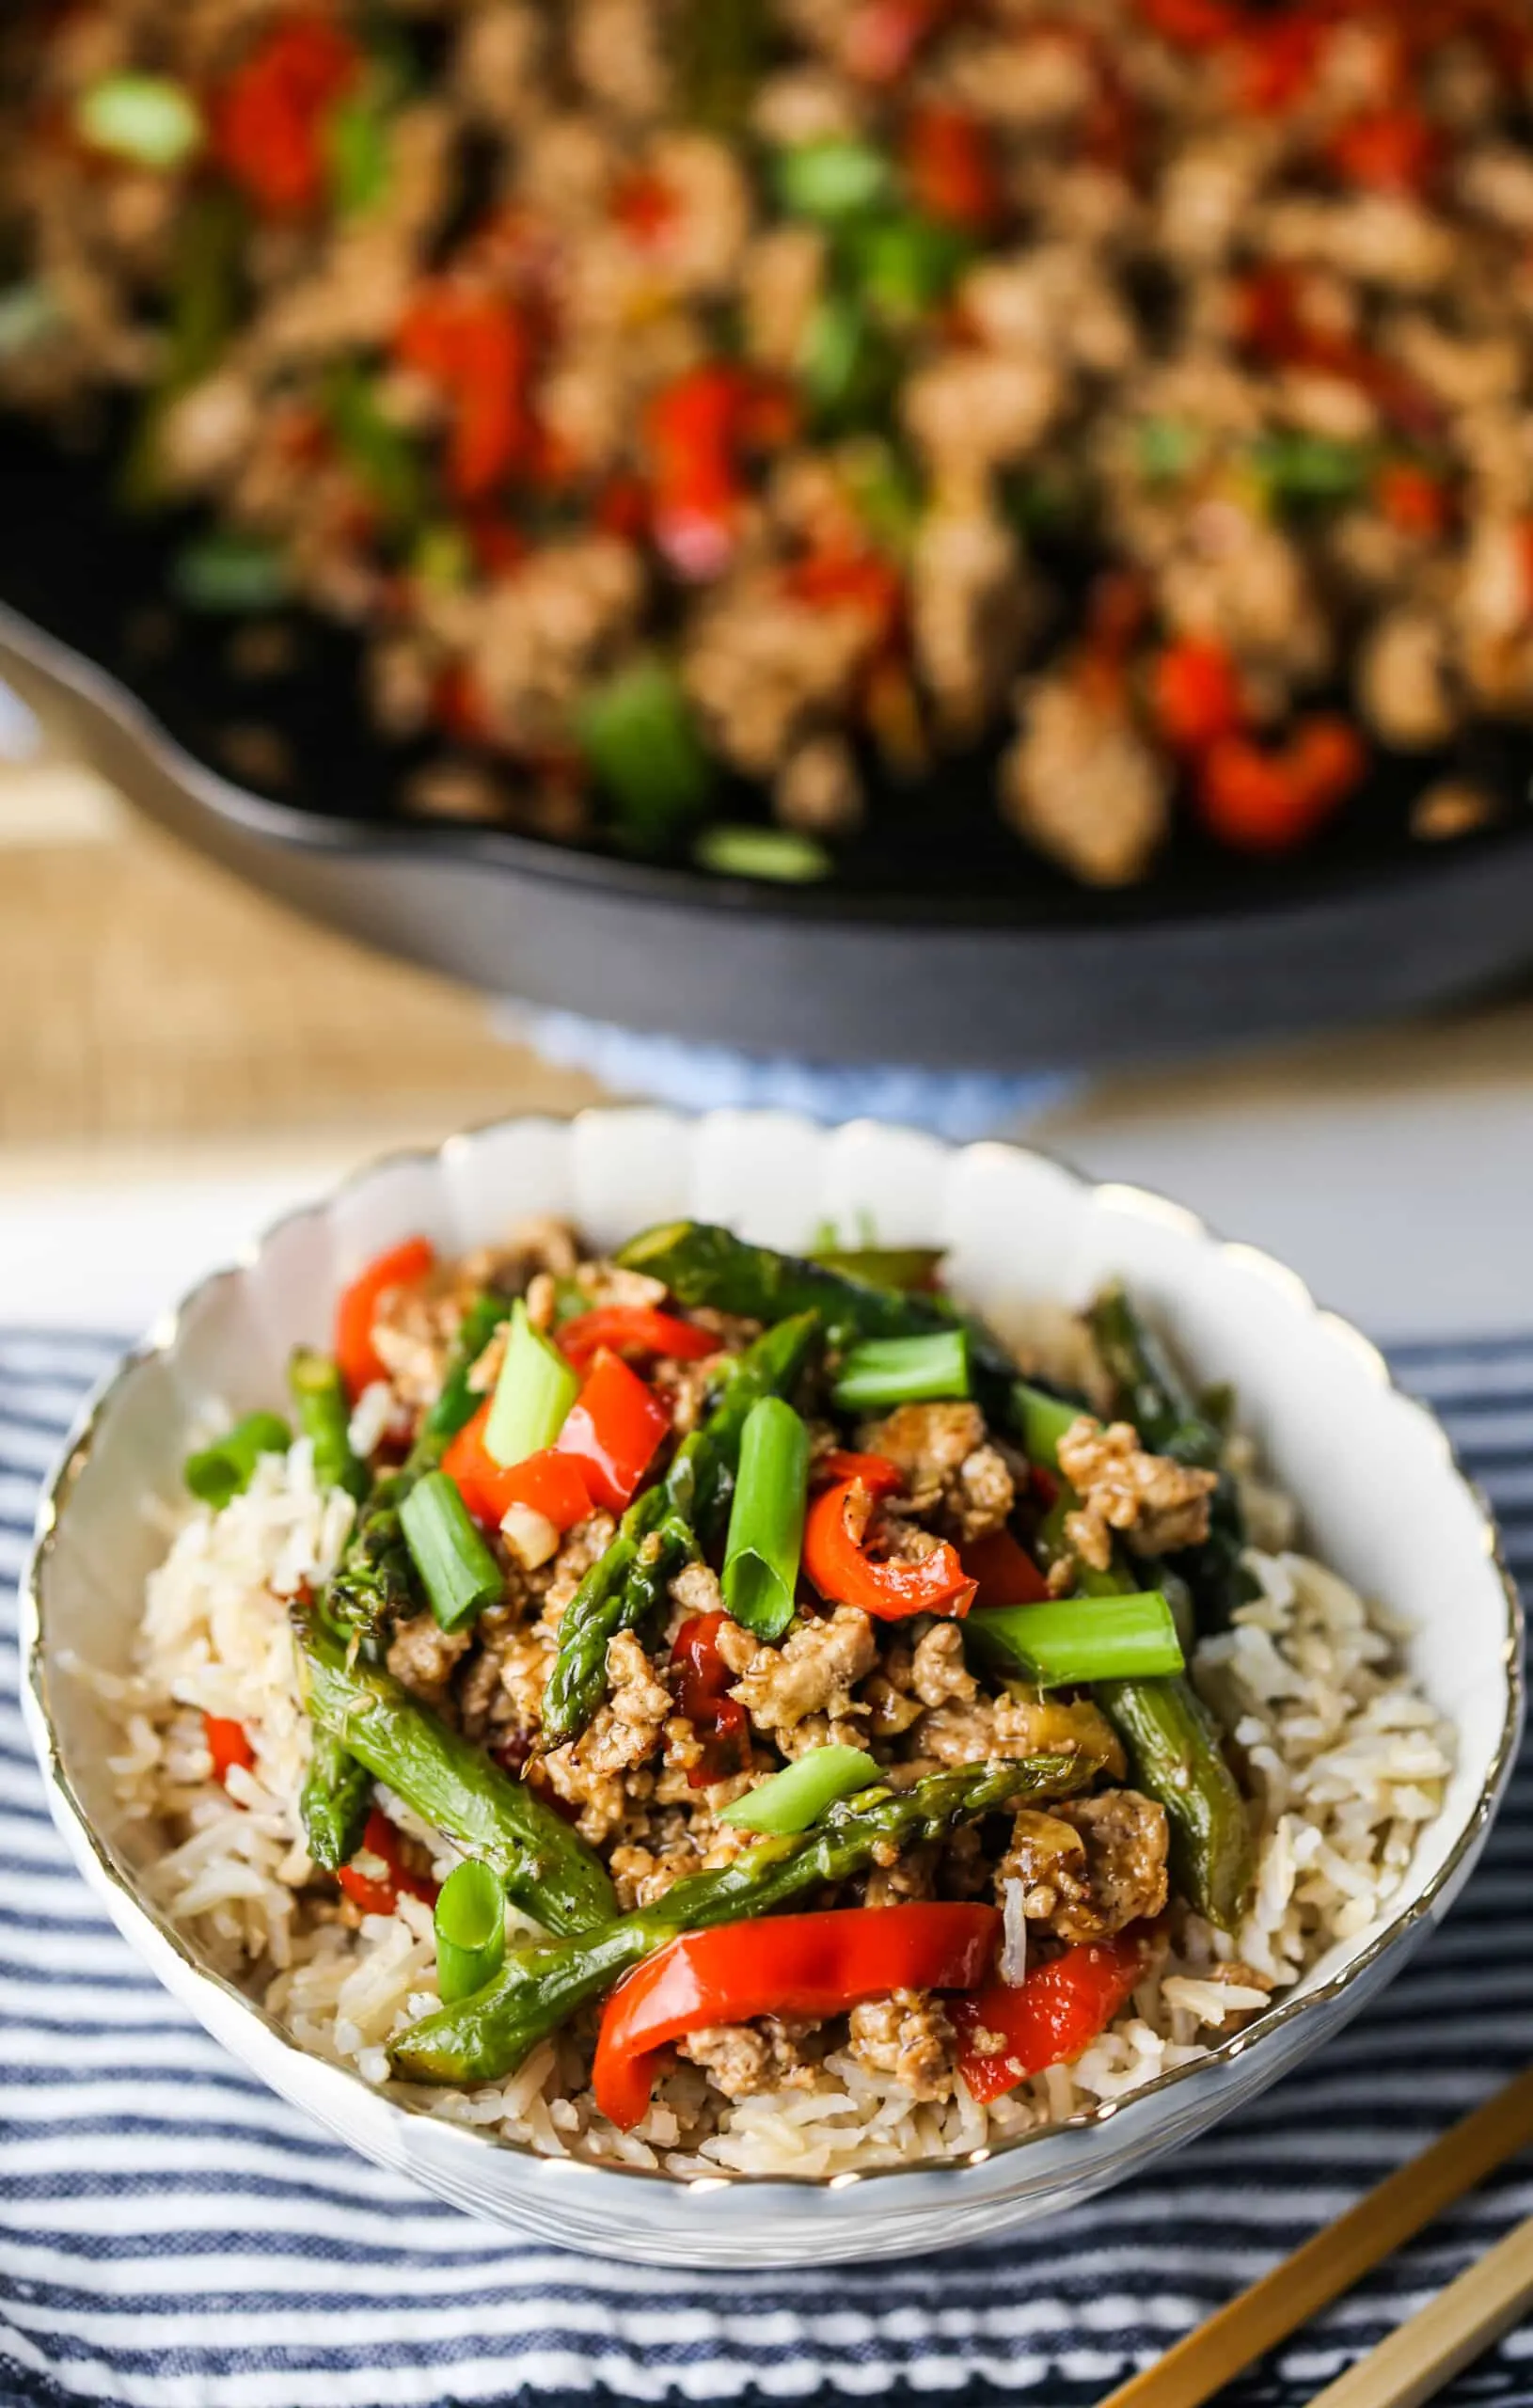 A top angle view of turkey asparagus stir-fry in a blue and white bowl and in a cast iron skillet.